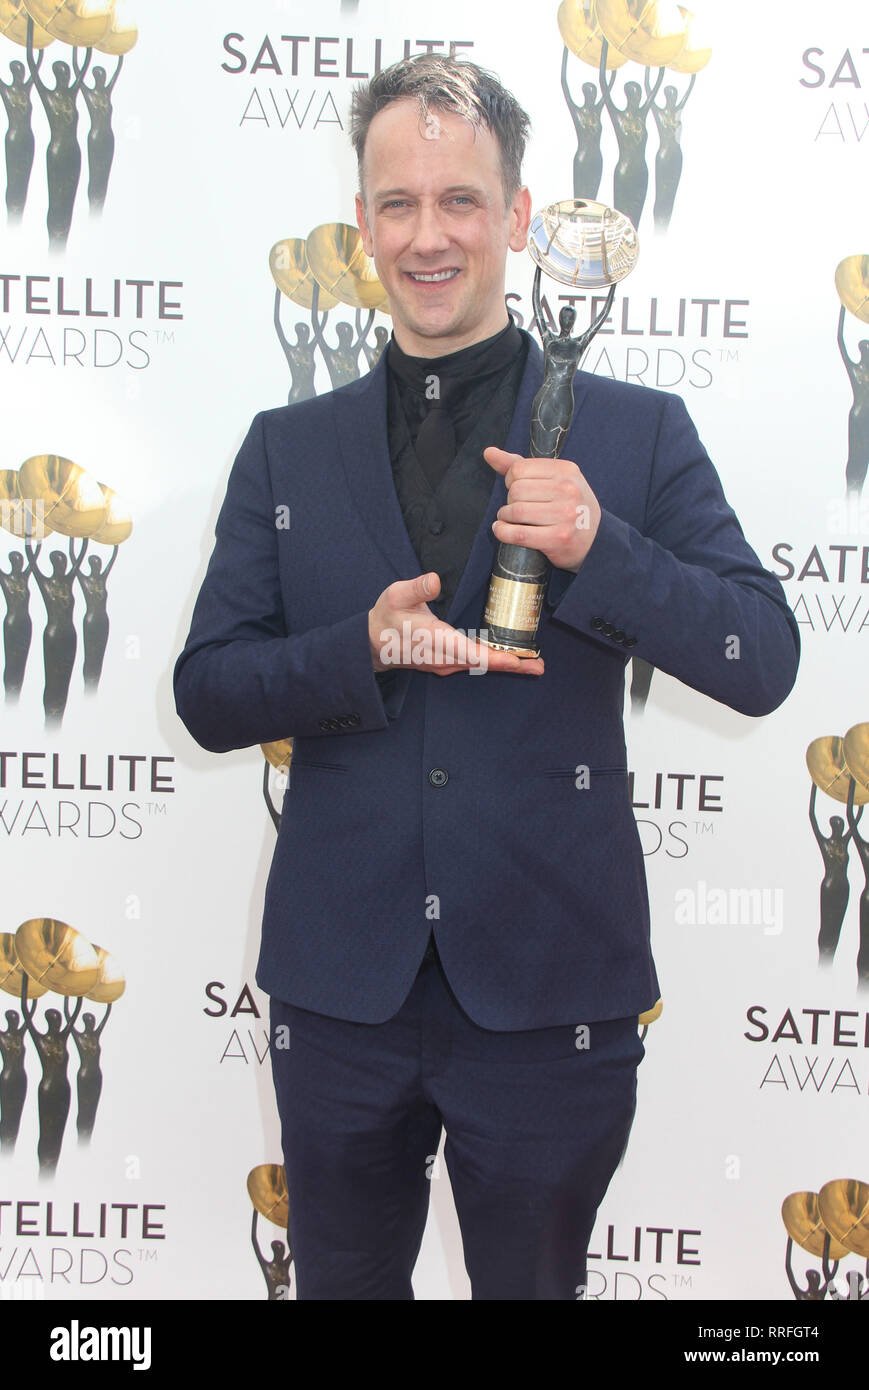 02/22/2019 The 23rd Satellite Awards held at the Mondrian Los Angeles in Los Angeles, CA  Photo: Cronos/Hollywood News Stock Photo